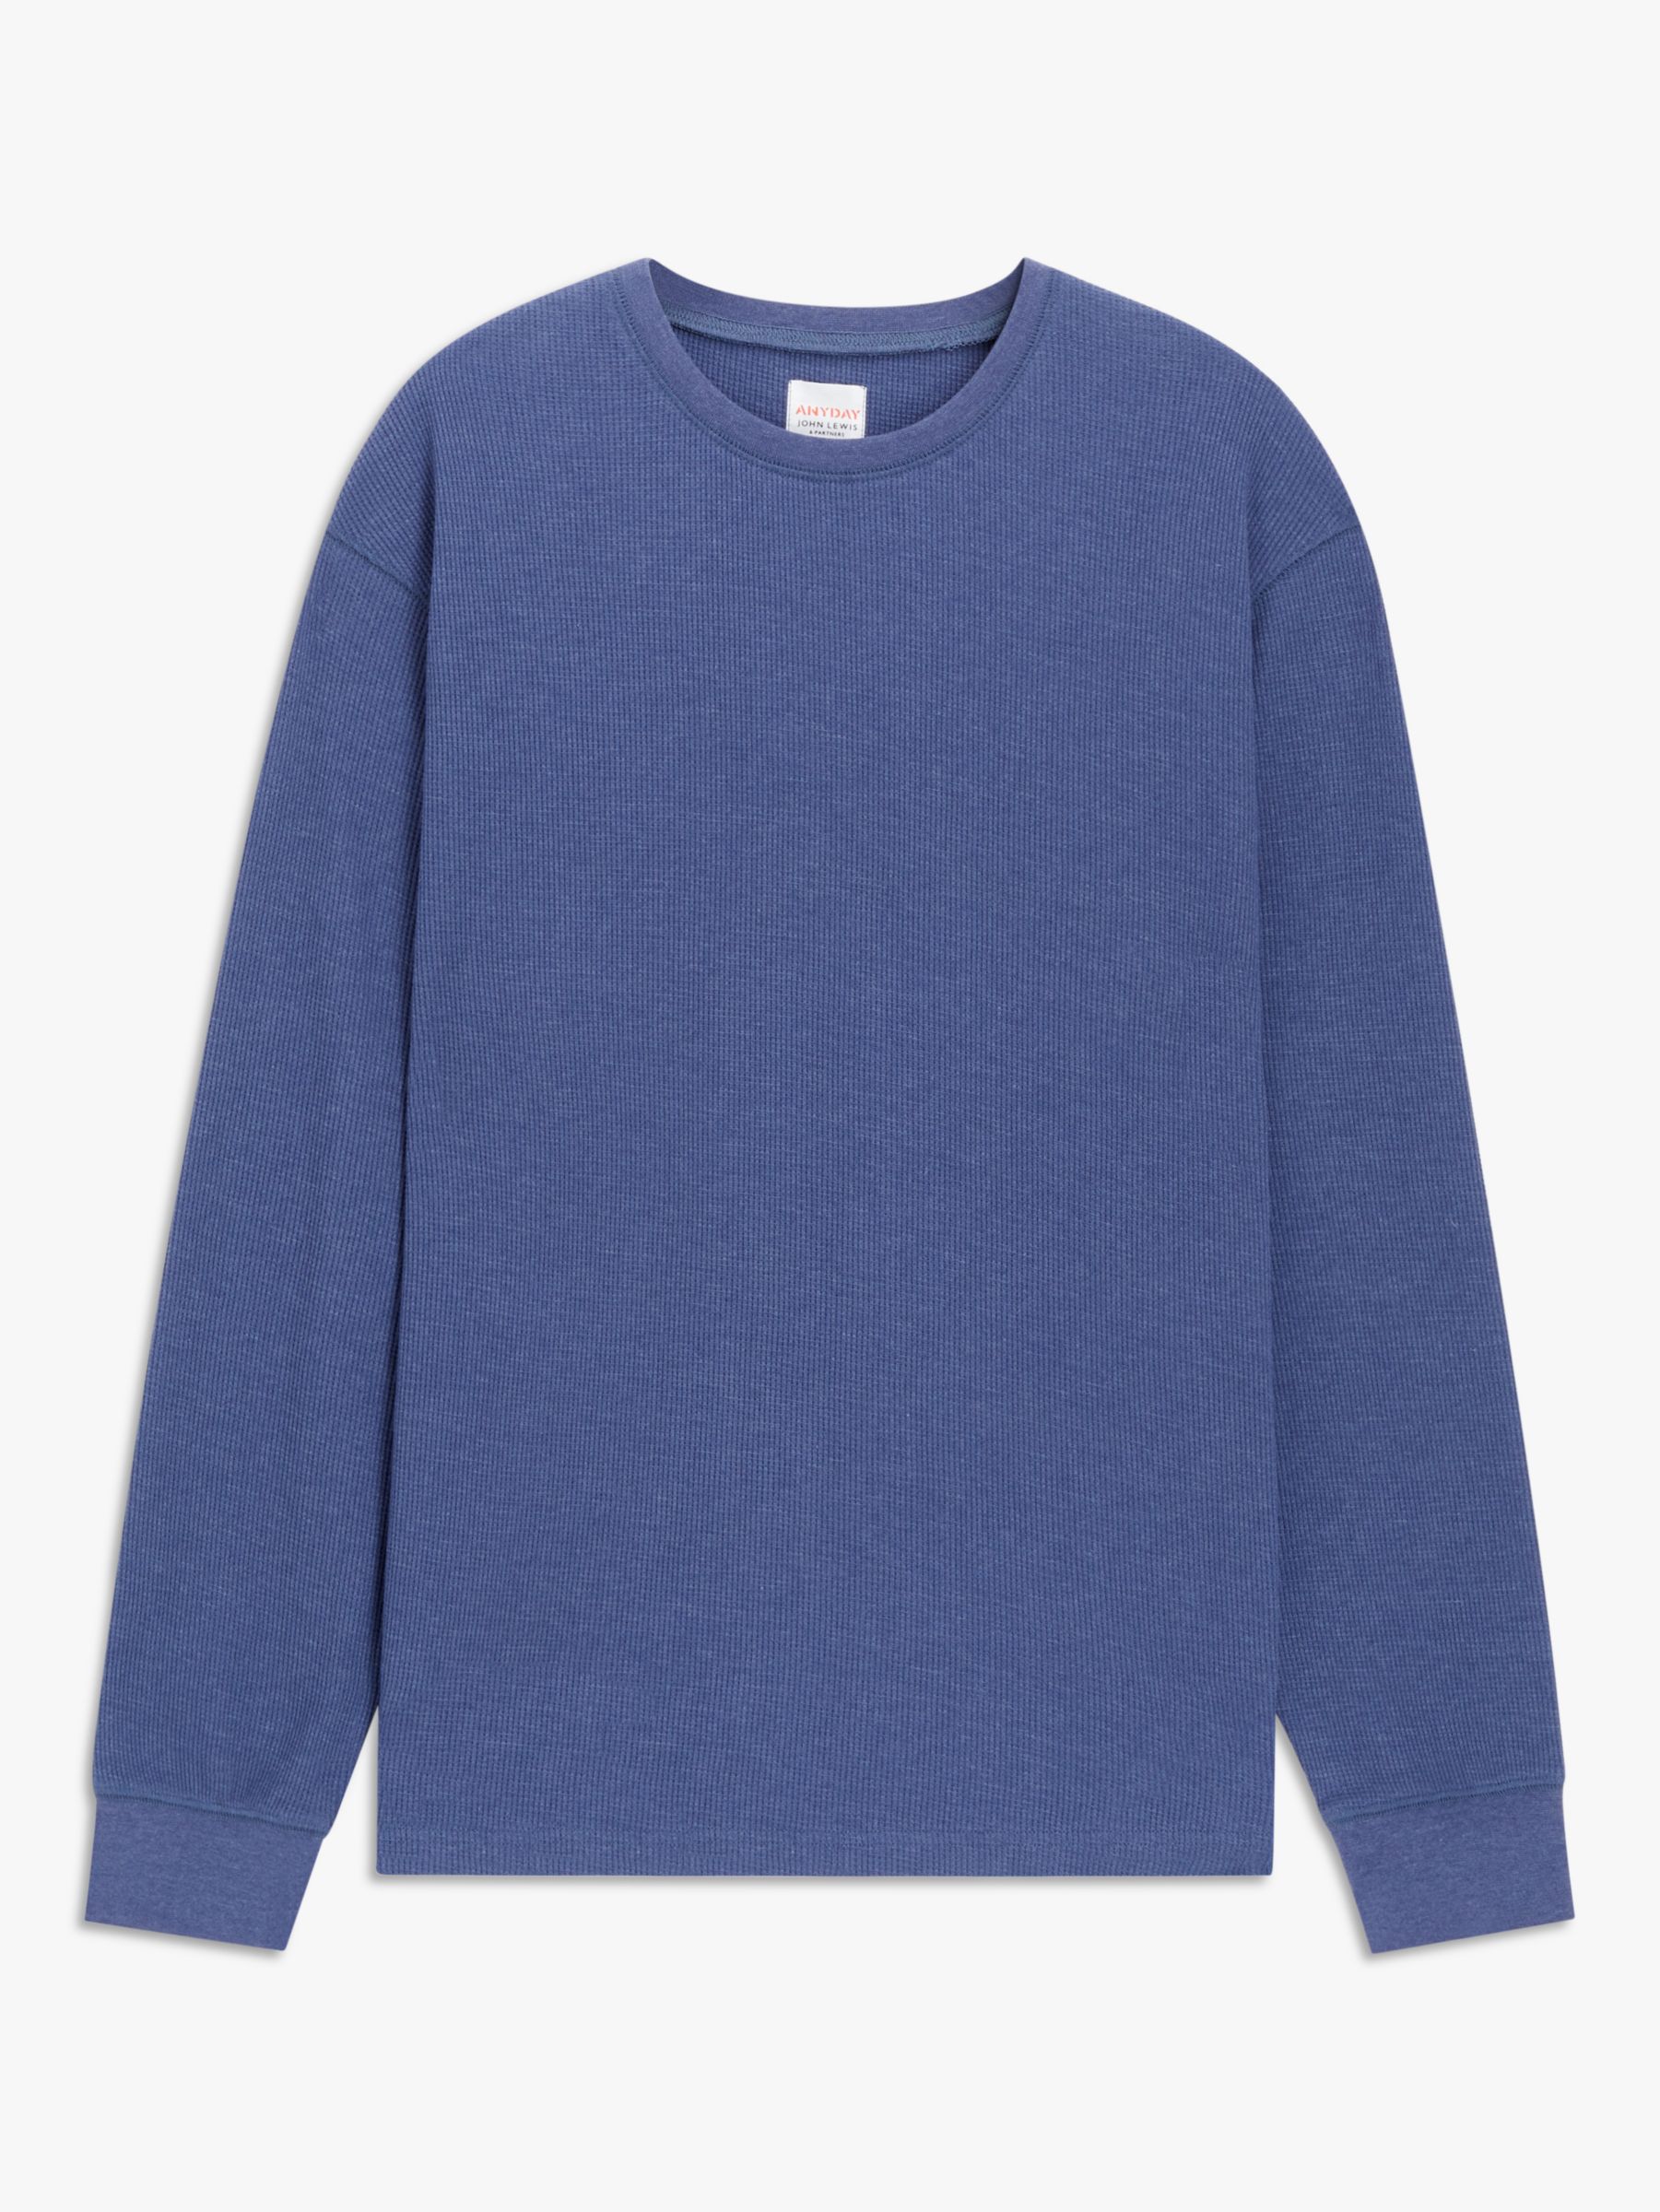 Buy John Lewis ANYDAY Waffle Cotton Blend Long Sleeve Lounge Top Online at johnlewis.com